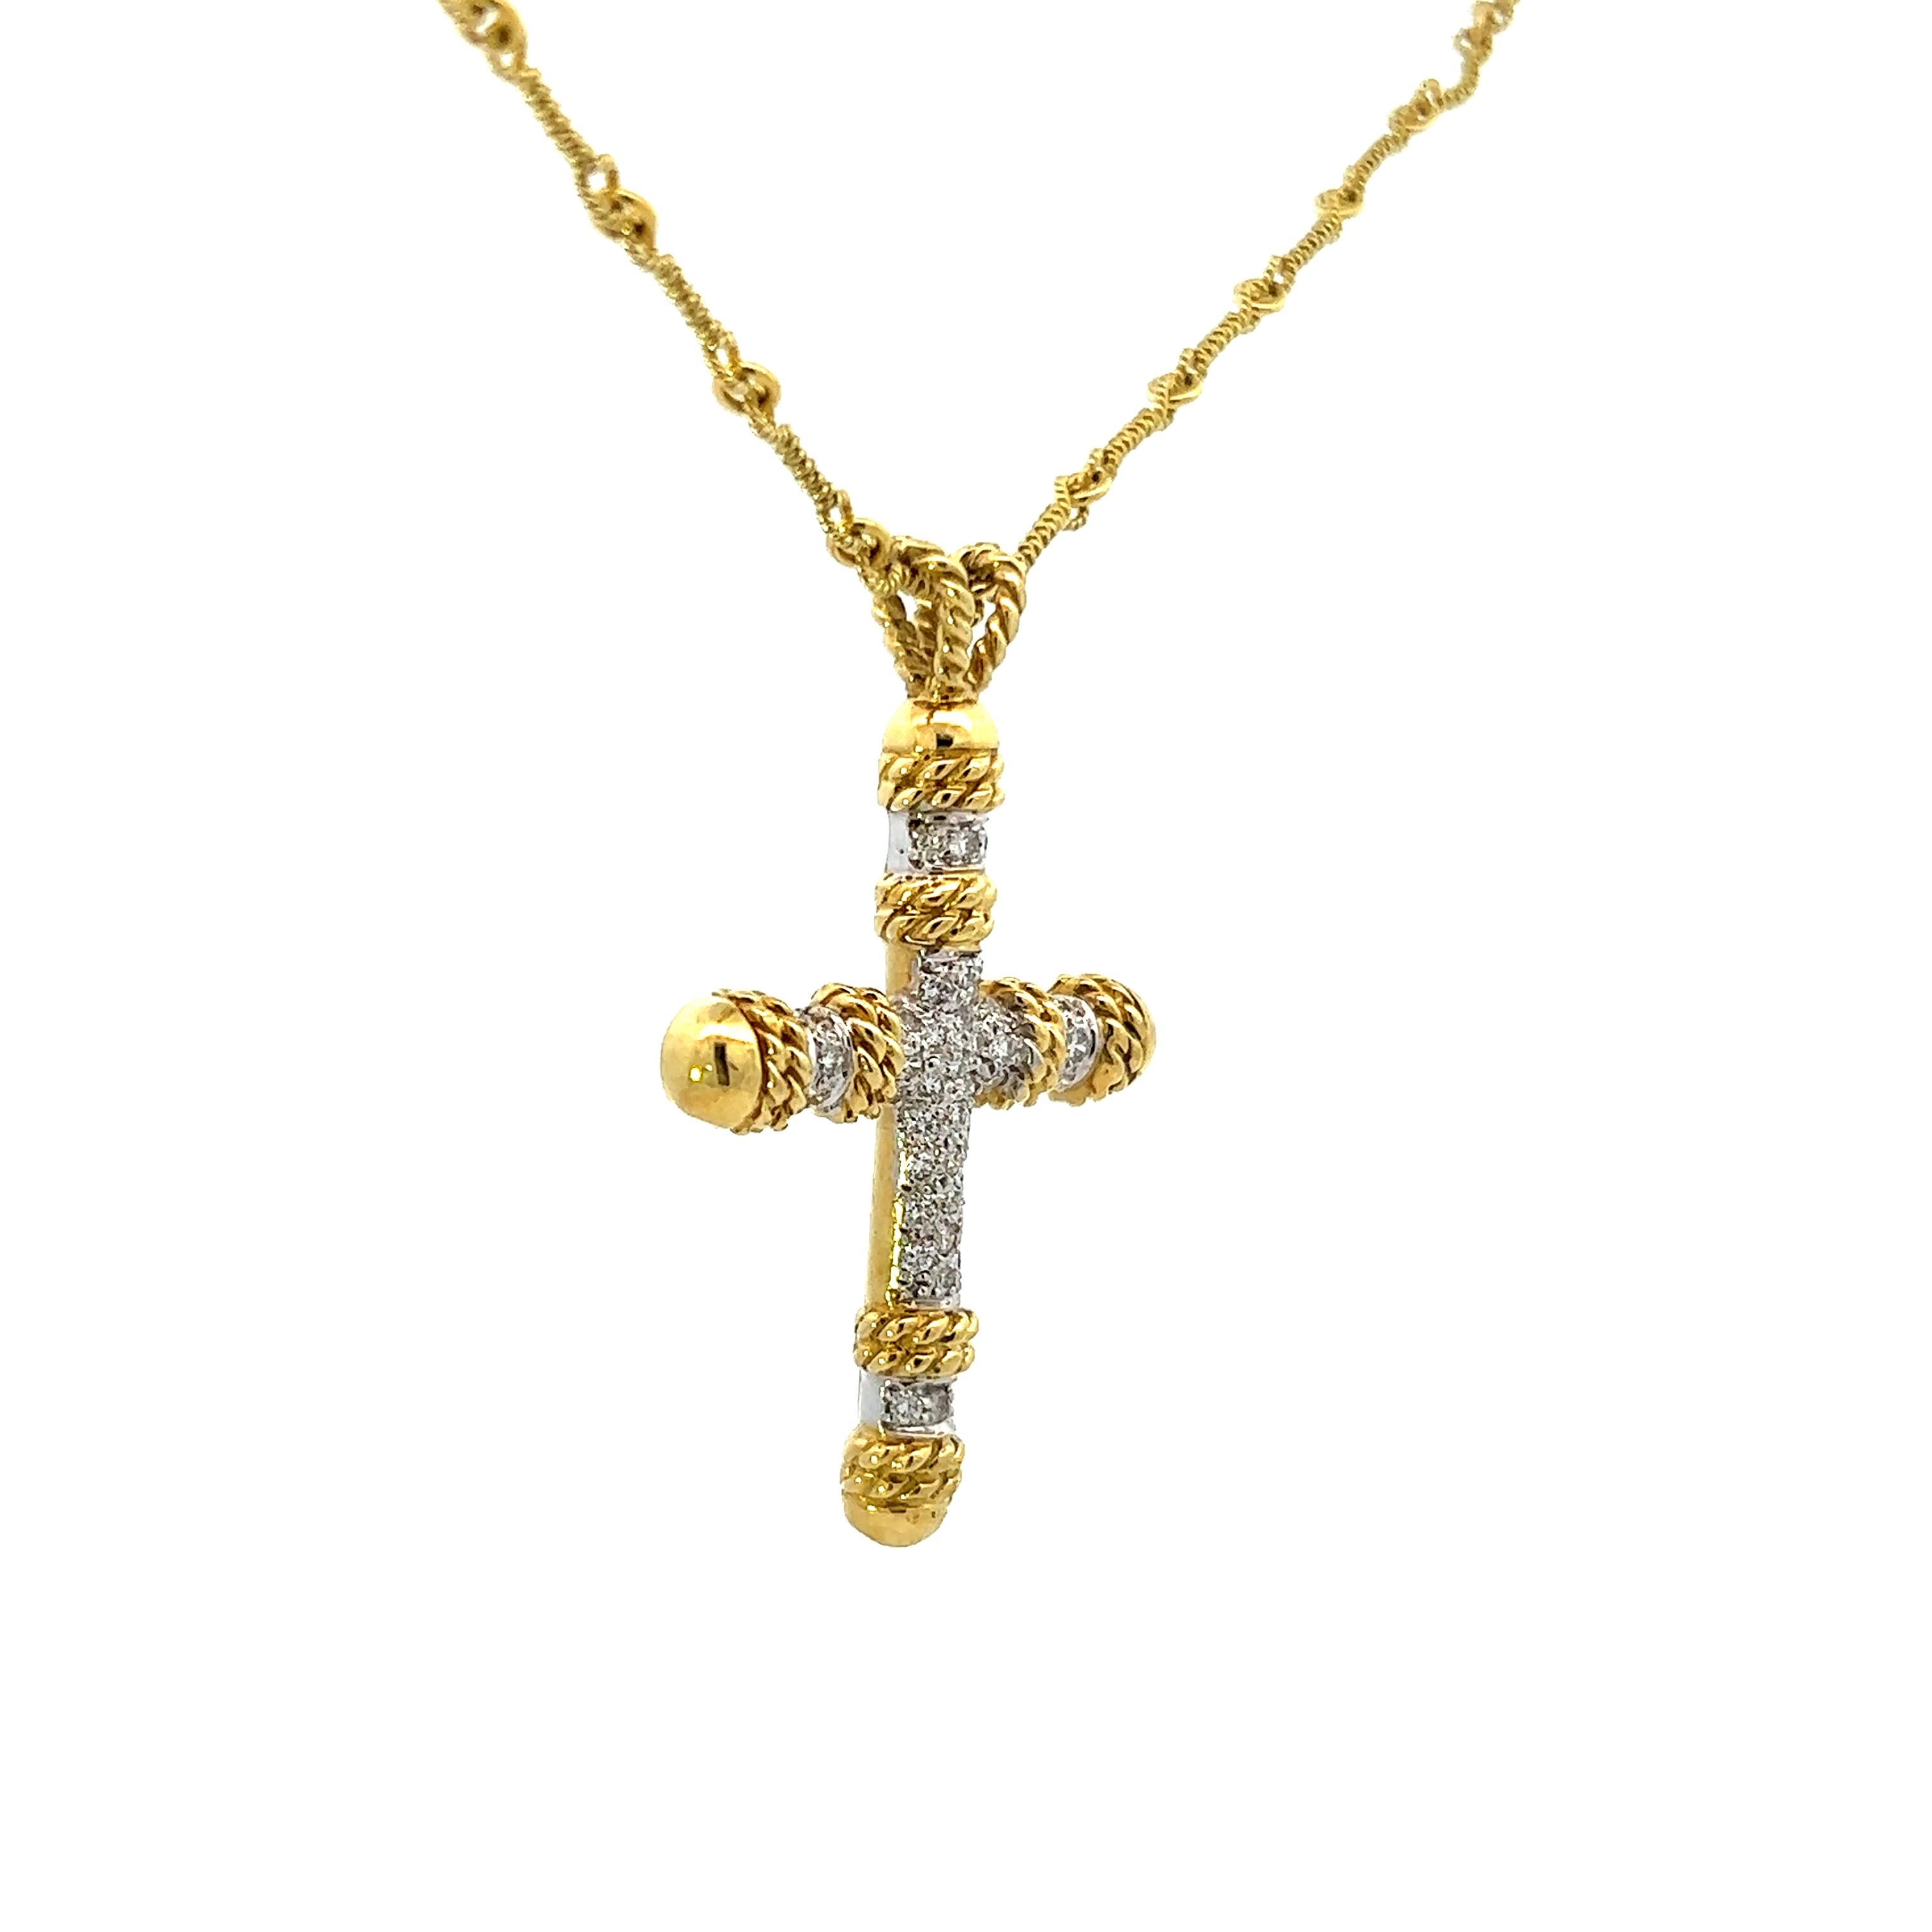 This gorgeous necklace features a 18k yellow and white gold diamond cross pendant on a unique 18k yellow gold handmade chain. This necklace carries a beautiful rope design that can be seen in the pendant as well as the handmade chain. This unique